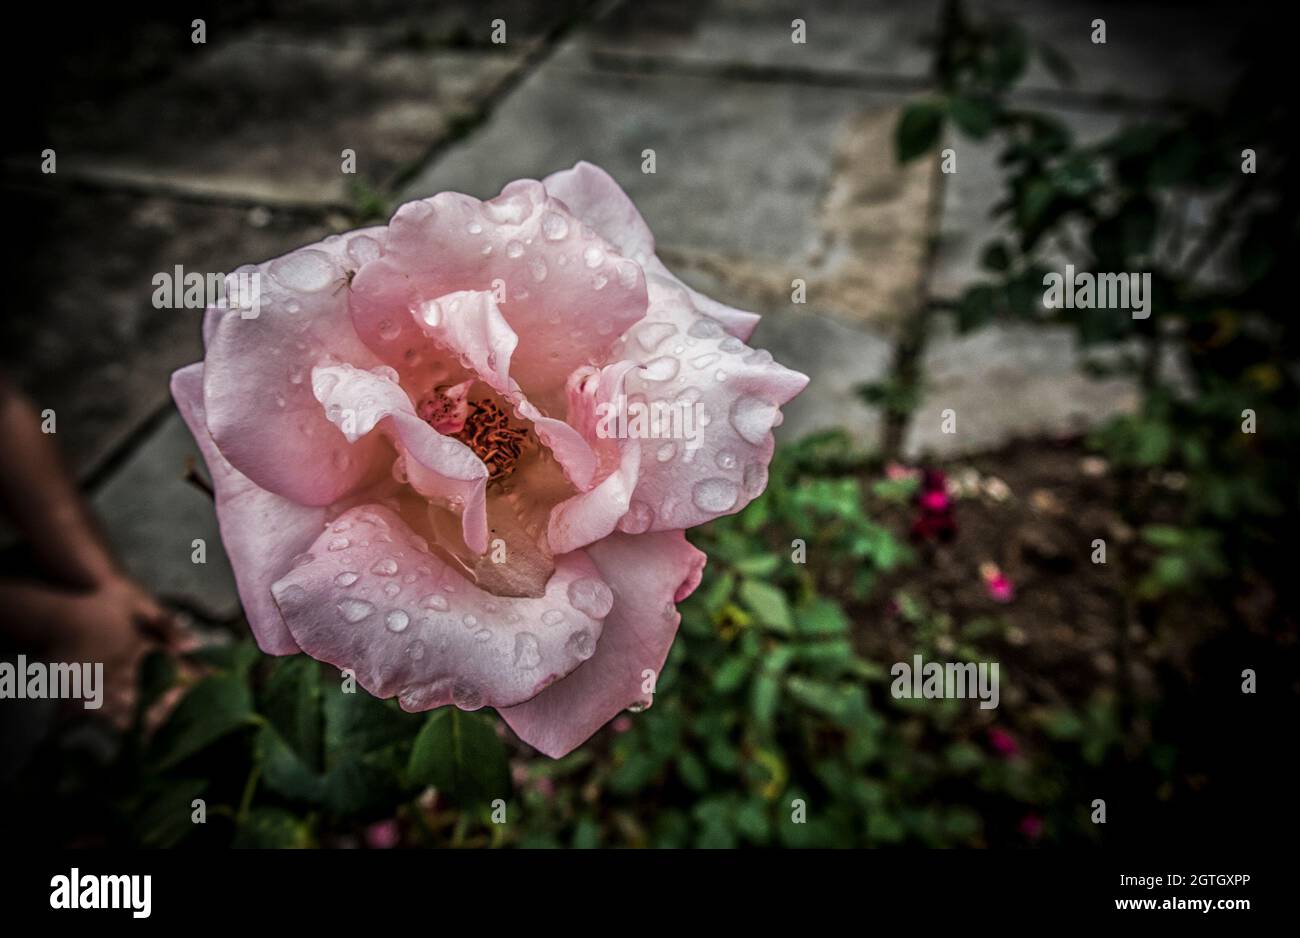 A single pink rose after the rain Stock Photo